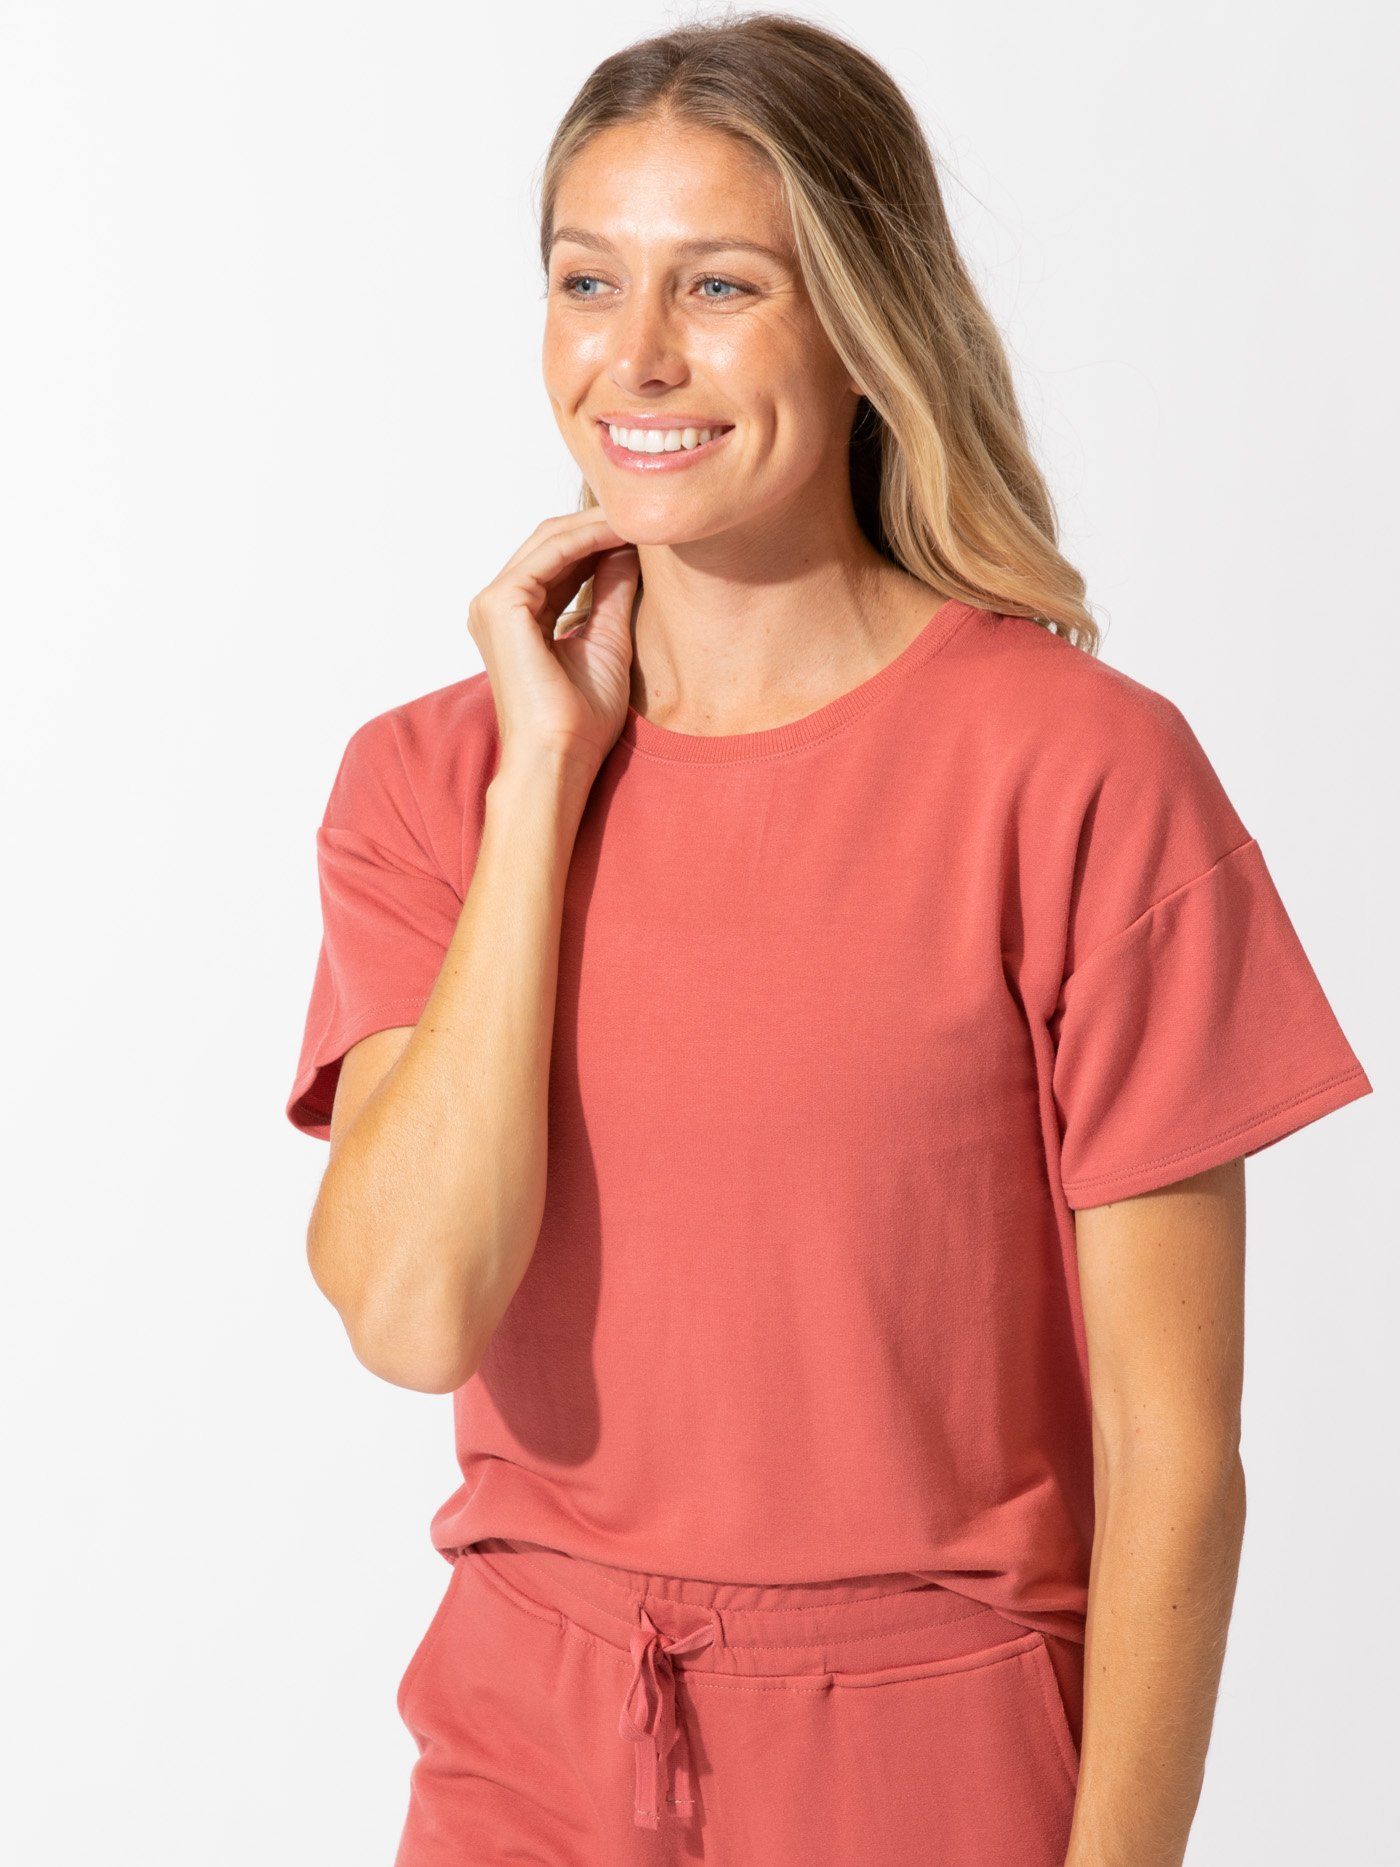 Drop Shoulder Tee Womens Tops Tee Threads 4 Thought 